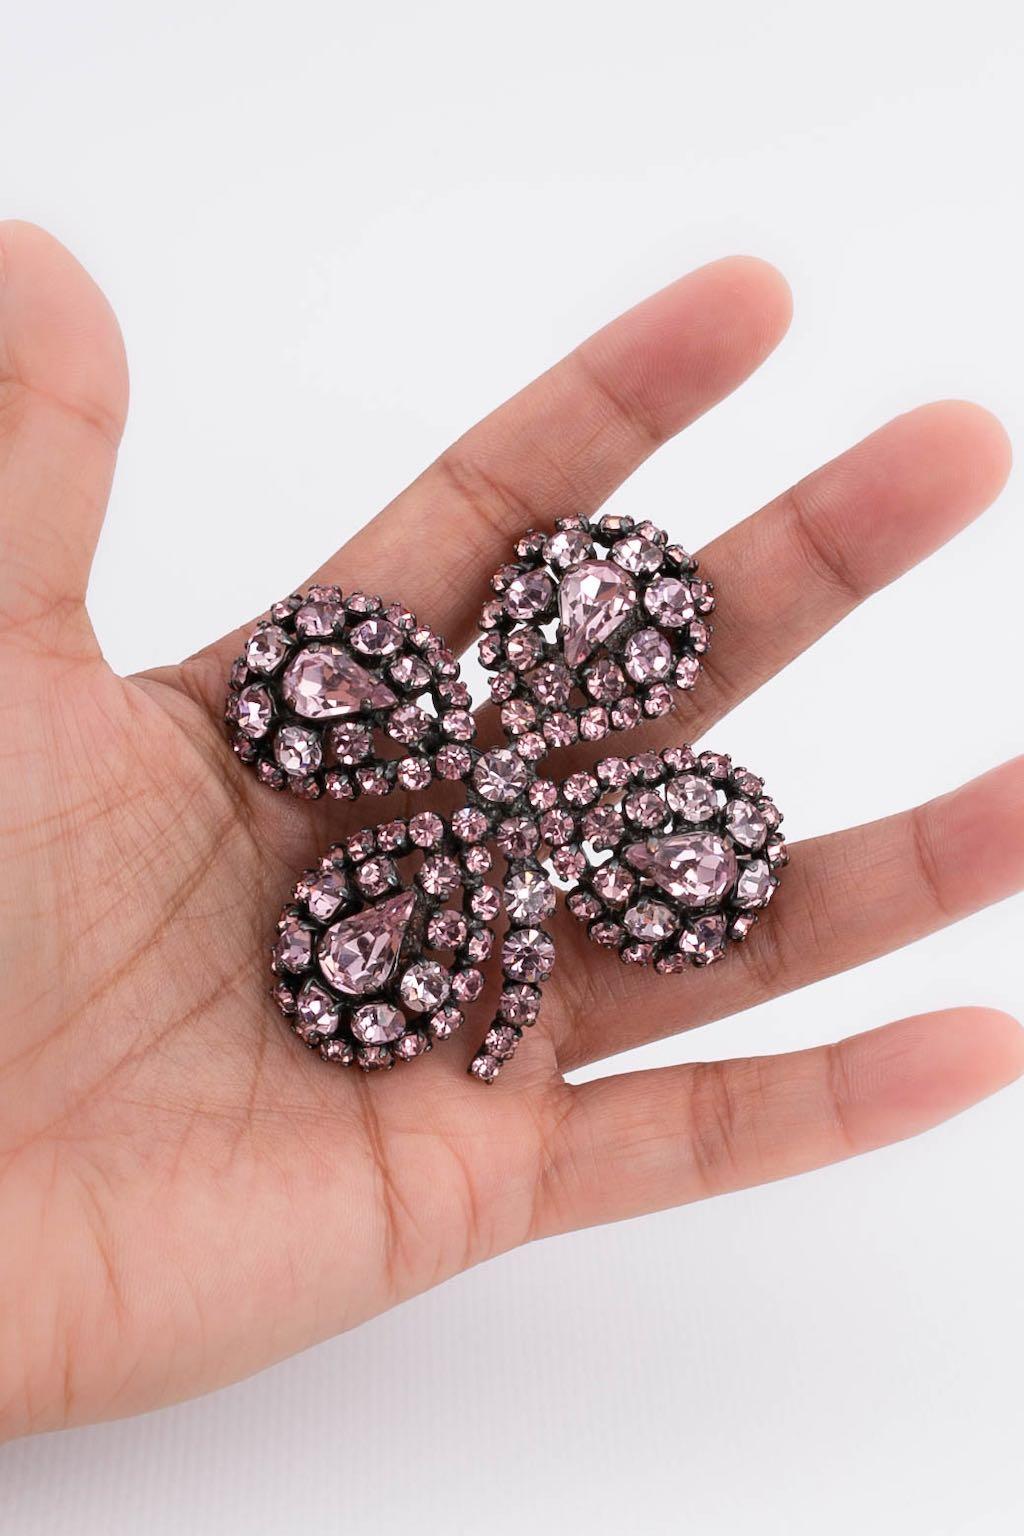 Rochas - Silver plated brooch adorned with pink rhinestones. Signature upon a plate.

Additional information:
Condition: Very good condition
Dimensions: 6 cm (2,36 in) x 6 cm (2,36 in)

Seller Reference: BR50
